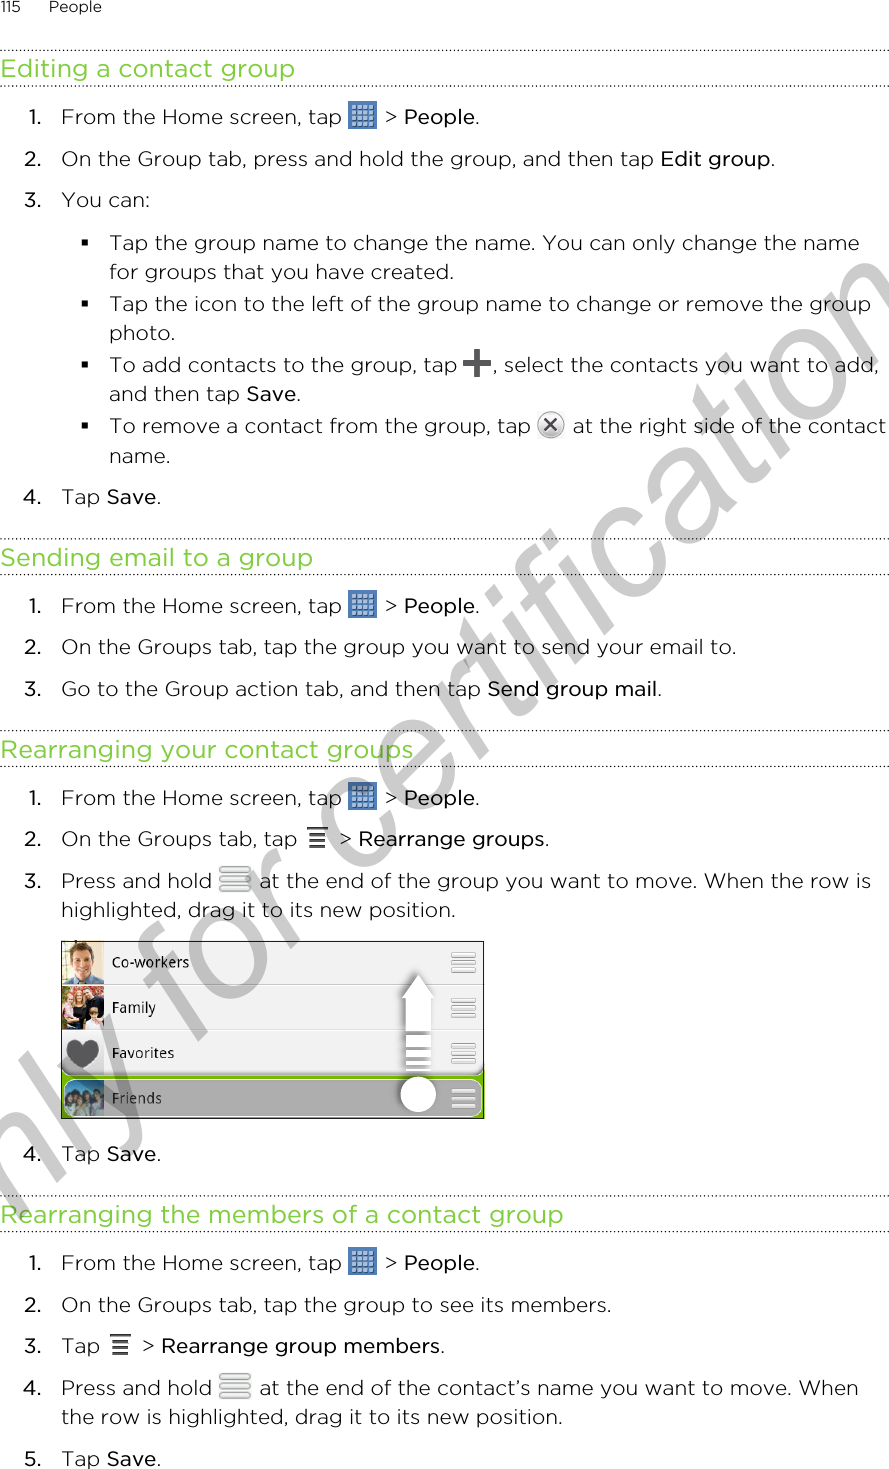 Editing a contact group1. From the Home screen, tap   &gt; People.2. On the Group tab, press and hold the group, and then tap Edit group.3. You can:§Tap the group name to change the name. You can only change the namefor groups that you have created.§Tap the icon to the left of the group name to change or remove the groupphoto.§To add contacts to the group, tap  , select the contacts you want to add,and then tap Save.§To remove a contact from the group, tap   at the right side of the contactname.4. Tap Save.Sending email to a group1. From the Home screen, tap   &gt; People.2. On the Groups tab, tap the group you want to send your email to.3. Go to the Group action tab, and then tap Send group mail.Rearranging your contact groups1. From the Home screen, tap   &gt; People.2. On the Groups tab, tap   &gt; Rearrange groups.3. Press and hold   at the end of the group you want to move. When the row ishighlighted, drag it to its new position. 4. Tap Save.Rearranging the members of a contact group1. From the Home screen, tap   &gt; People.2. On the Groups tab, tap the group to see its members.3. Tap   &gt; Rearrange group members.4. Press and hold   at the end of the contact’s name you want to move. Whenthe row is highlighted, drag it to its new position.5. Tap Save.115 PeopleOnly for certification